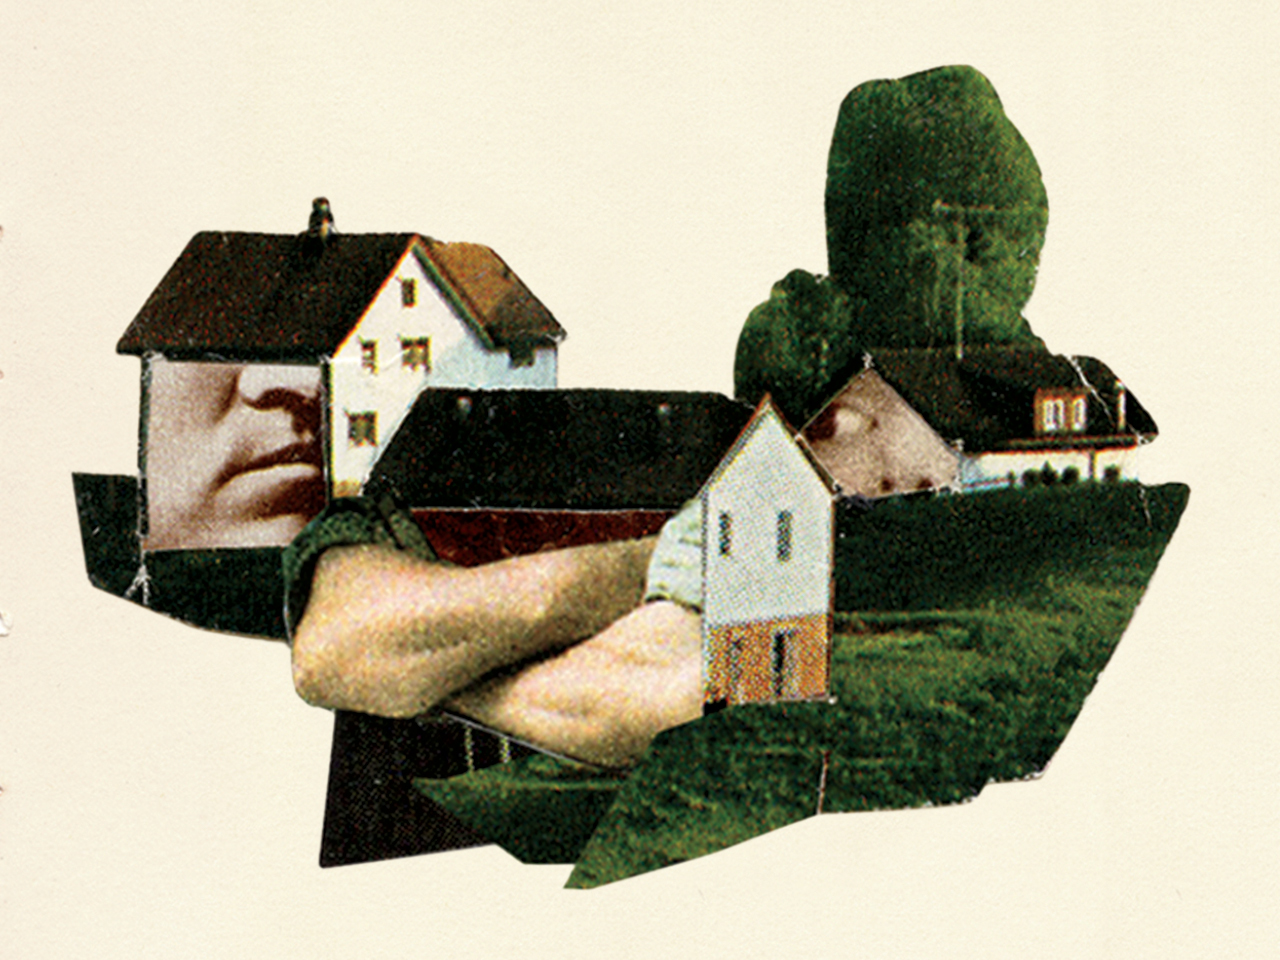 An illustrated collage of two houses with a man's face and crossed arms